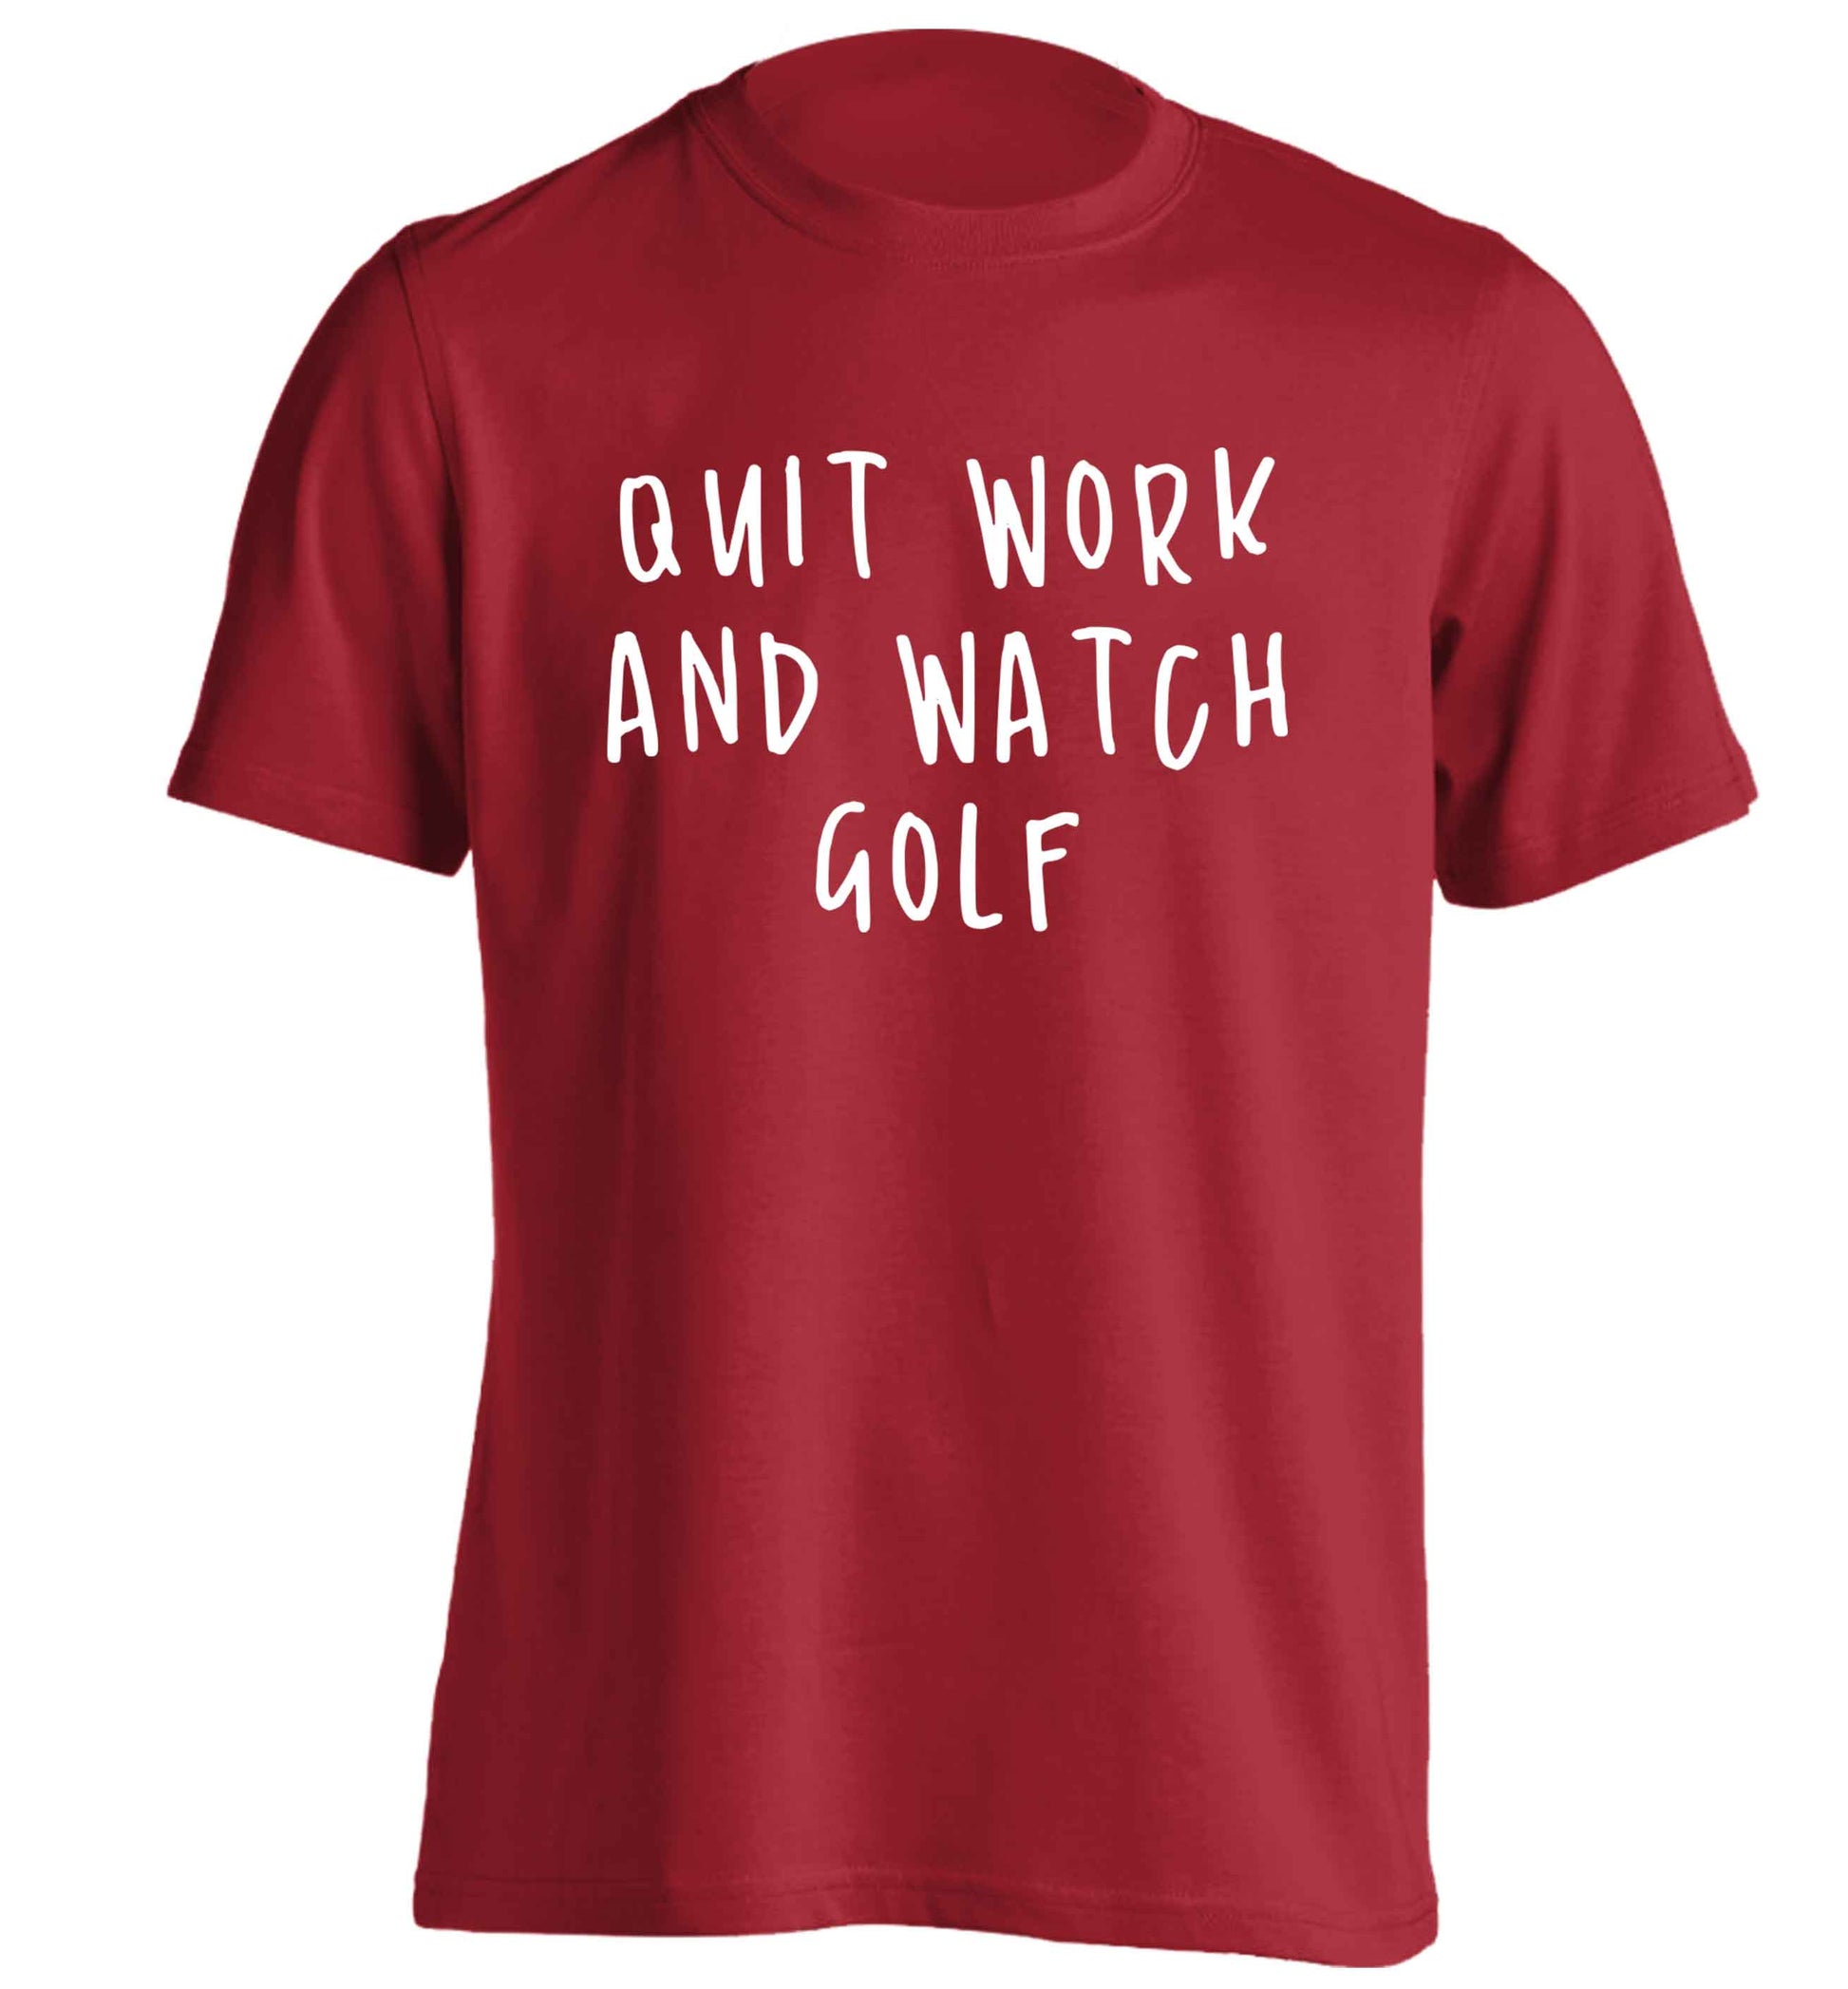 Quit work and watch golf adults unisex red Tshirt 2XL